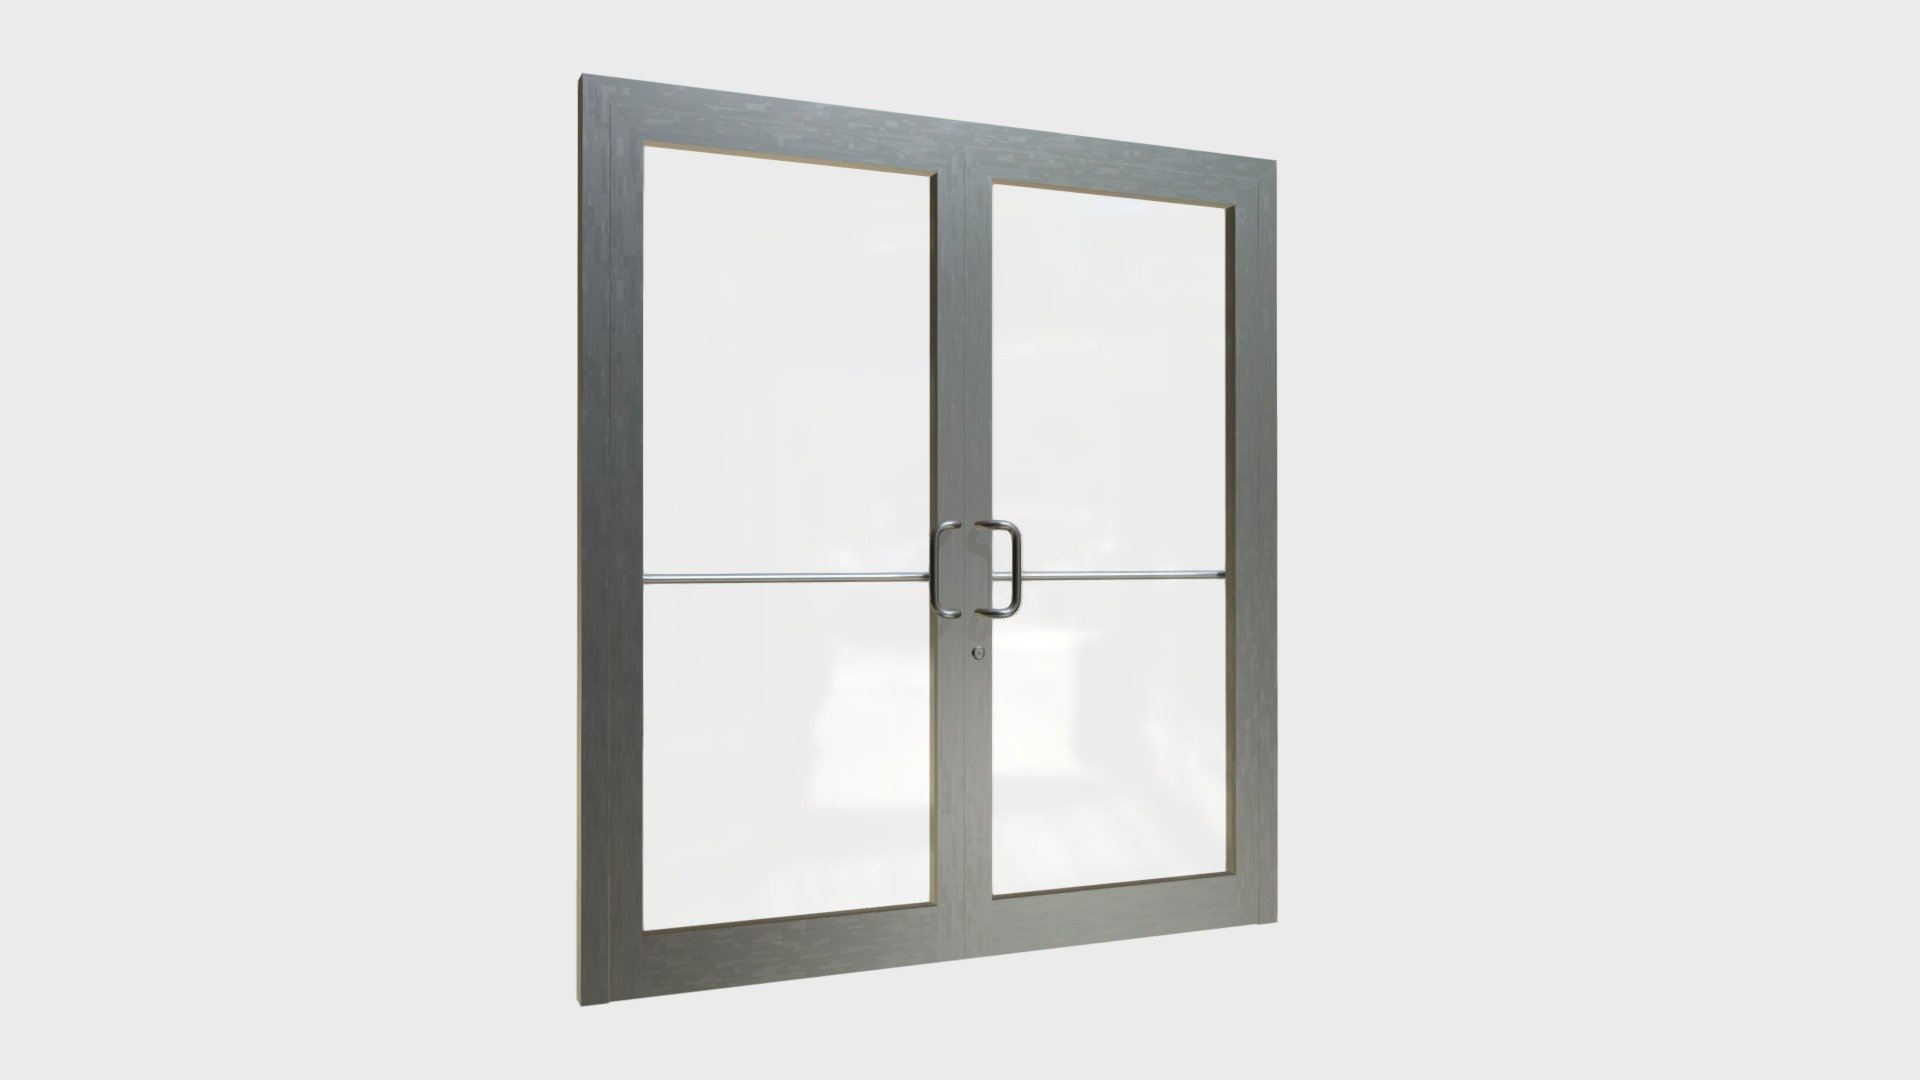 === The following description refers to the additional ZIP package provided with this model ===

Double storefront glass door 3D Model. 5 individual objects (frame, right door, right glass, left door, left glass), sharing 2 non overlapping UV Layout maps, Materials (glass, frame) and PBR Textures sets. Production-ready 3D Model, with PBR materials, textures, non overlapping UV Layout map provided in the package.

Quads only geometries (no tris/ngons).

Formats included: FBX, OBJ; scenes: BLEND (with Cycles / Eevee PBR Materials and Textures); other: 16-bit PNGs with Alpha.

5 Objects (meshes), 2 PBR Materials, UV unwrapped (non overlapping UV Layout map provided in the package); UV-mapped Textures.

UV Layout maps and Image Textures resolutions: 2048x2048; PBR Textures made with Substance Painter.

Polygonal, QUADS ONLY (no tris/ngons); 11878 vertices, 11666 quad faces (23332 tris).

Real world dimensions; scene scale units: cm in Blender 3.6.1 LTS (that is: Metric with 0.01 scale) 3d model